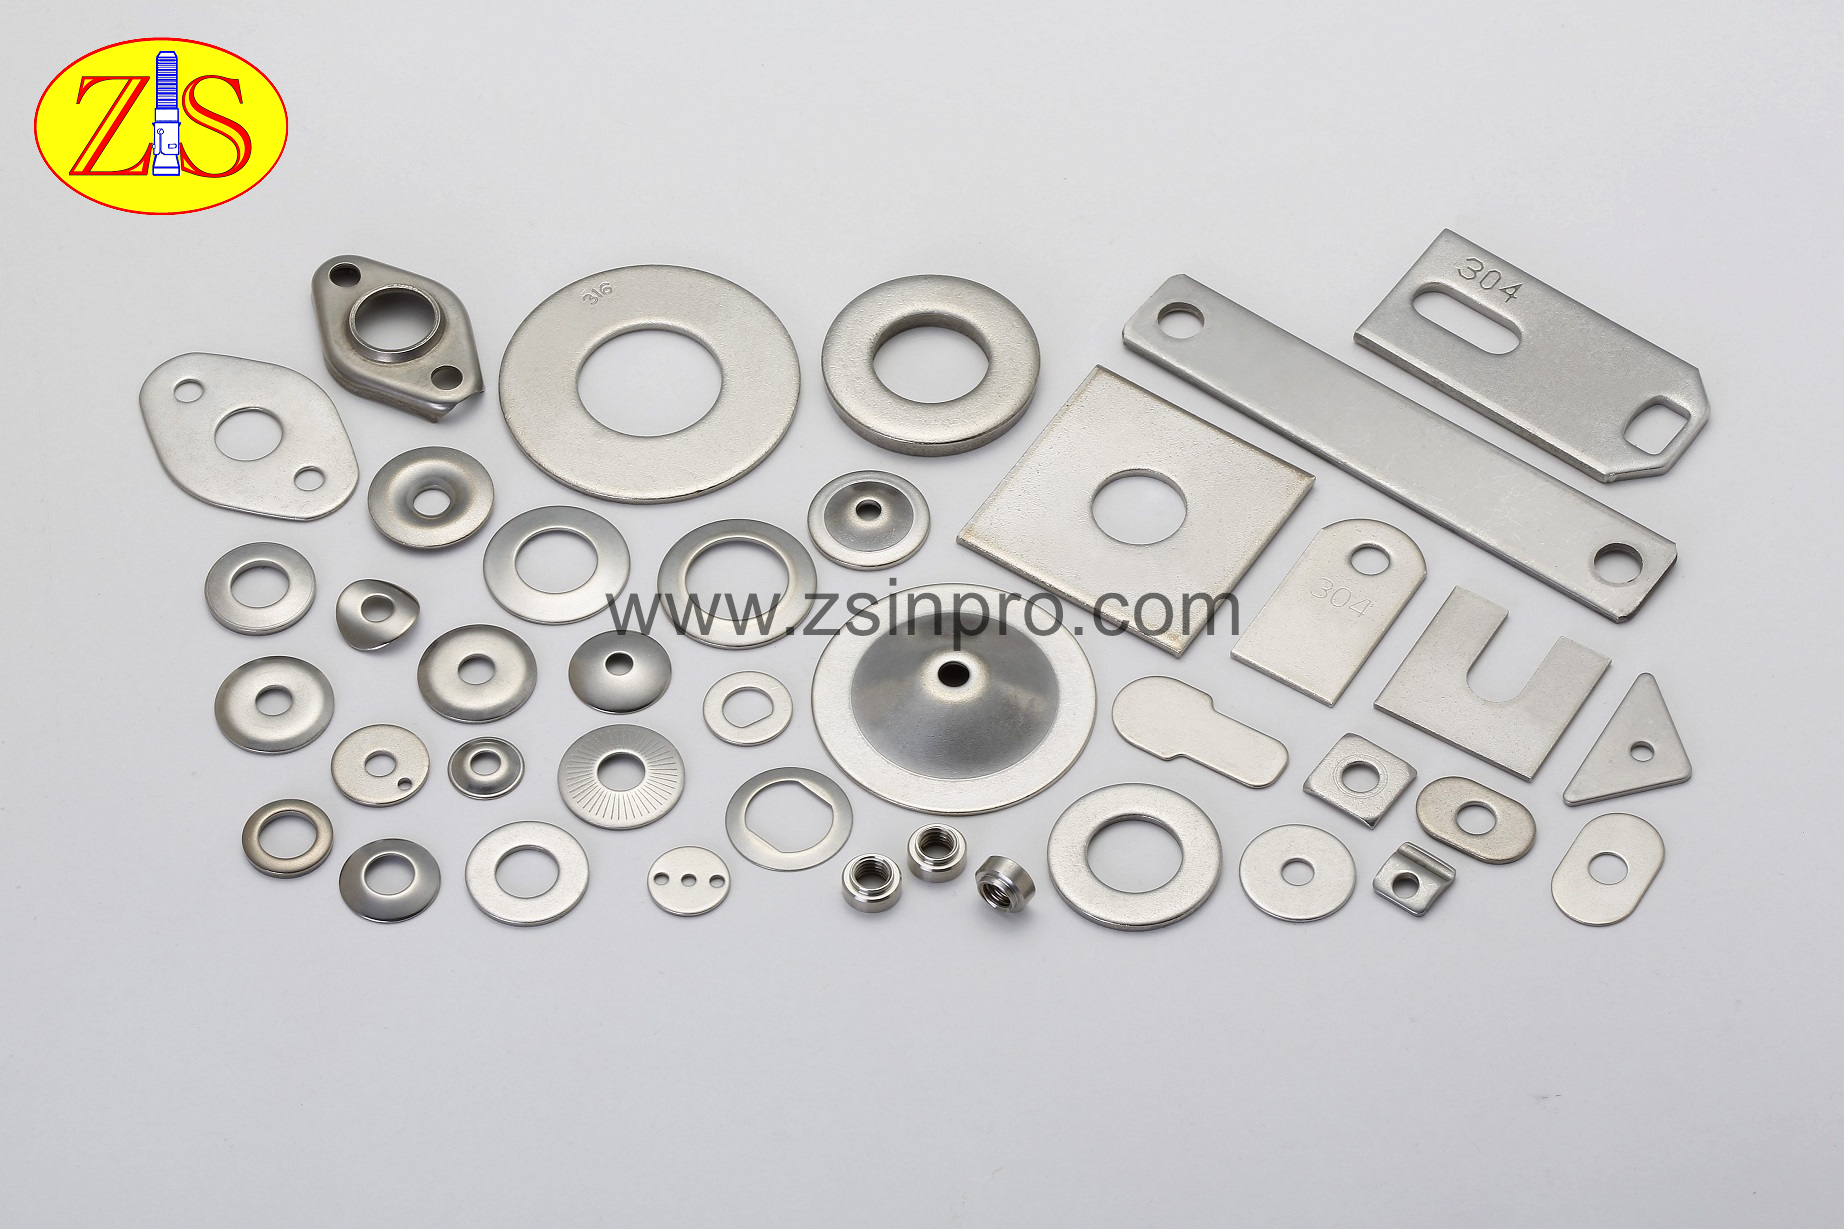 Hot 50X 304 Stainless Steel Flat Machine Washer Plain Washer Gaskets M1.6-M14BSC 